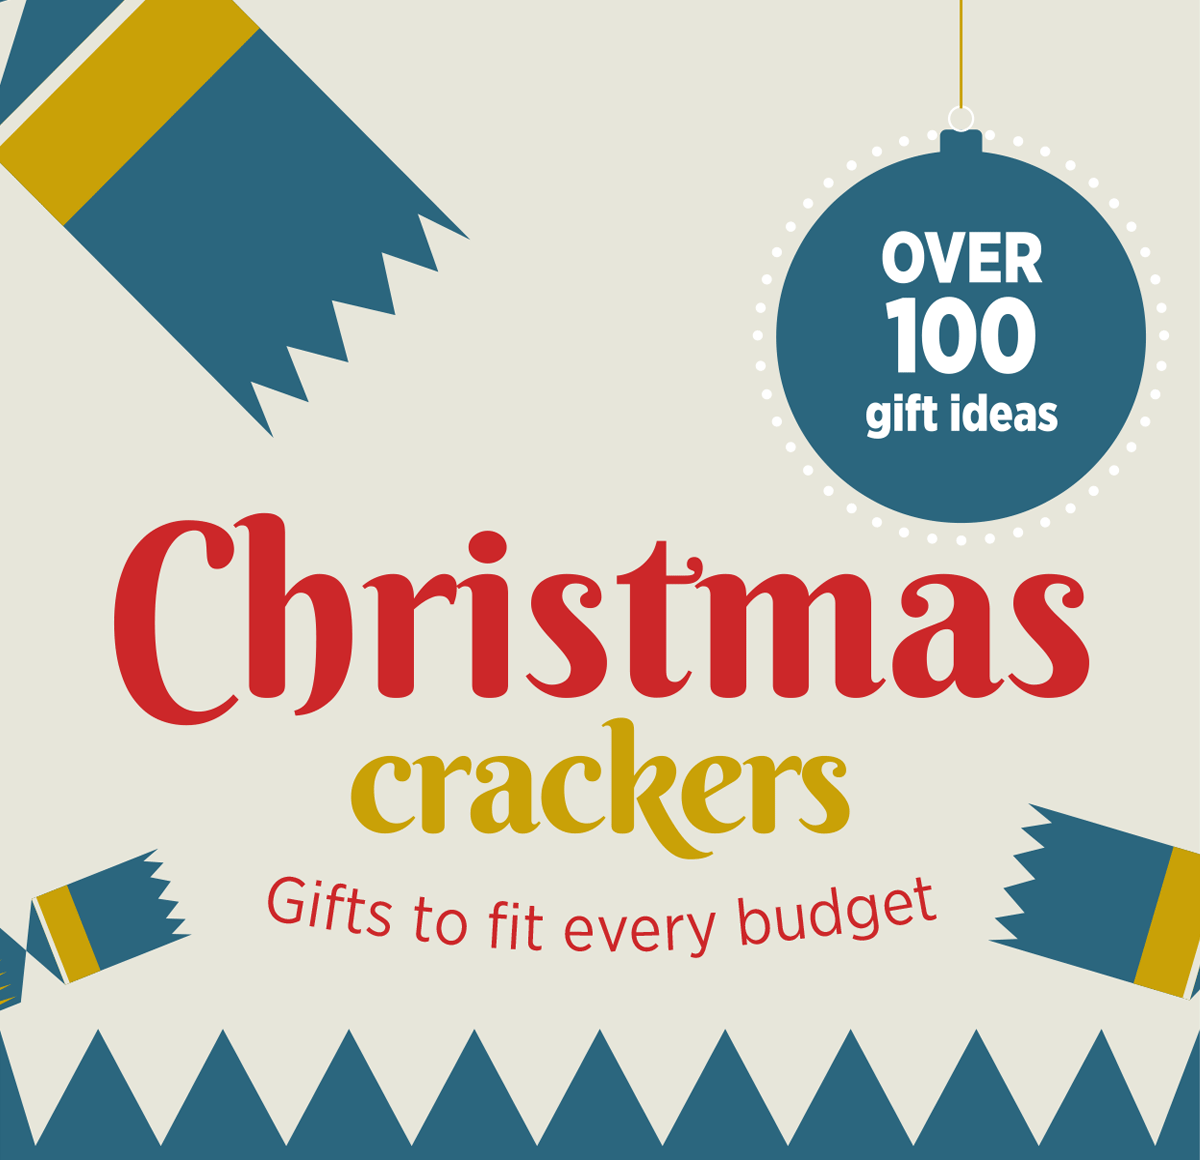 Christmas crackers - Gifts to fit every budget